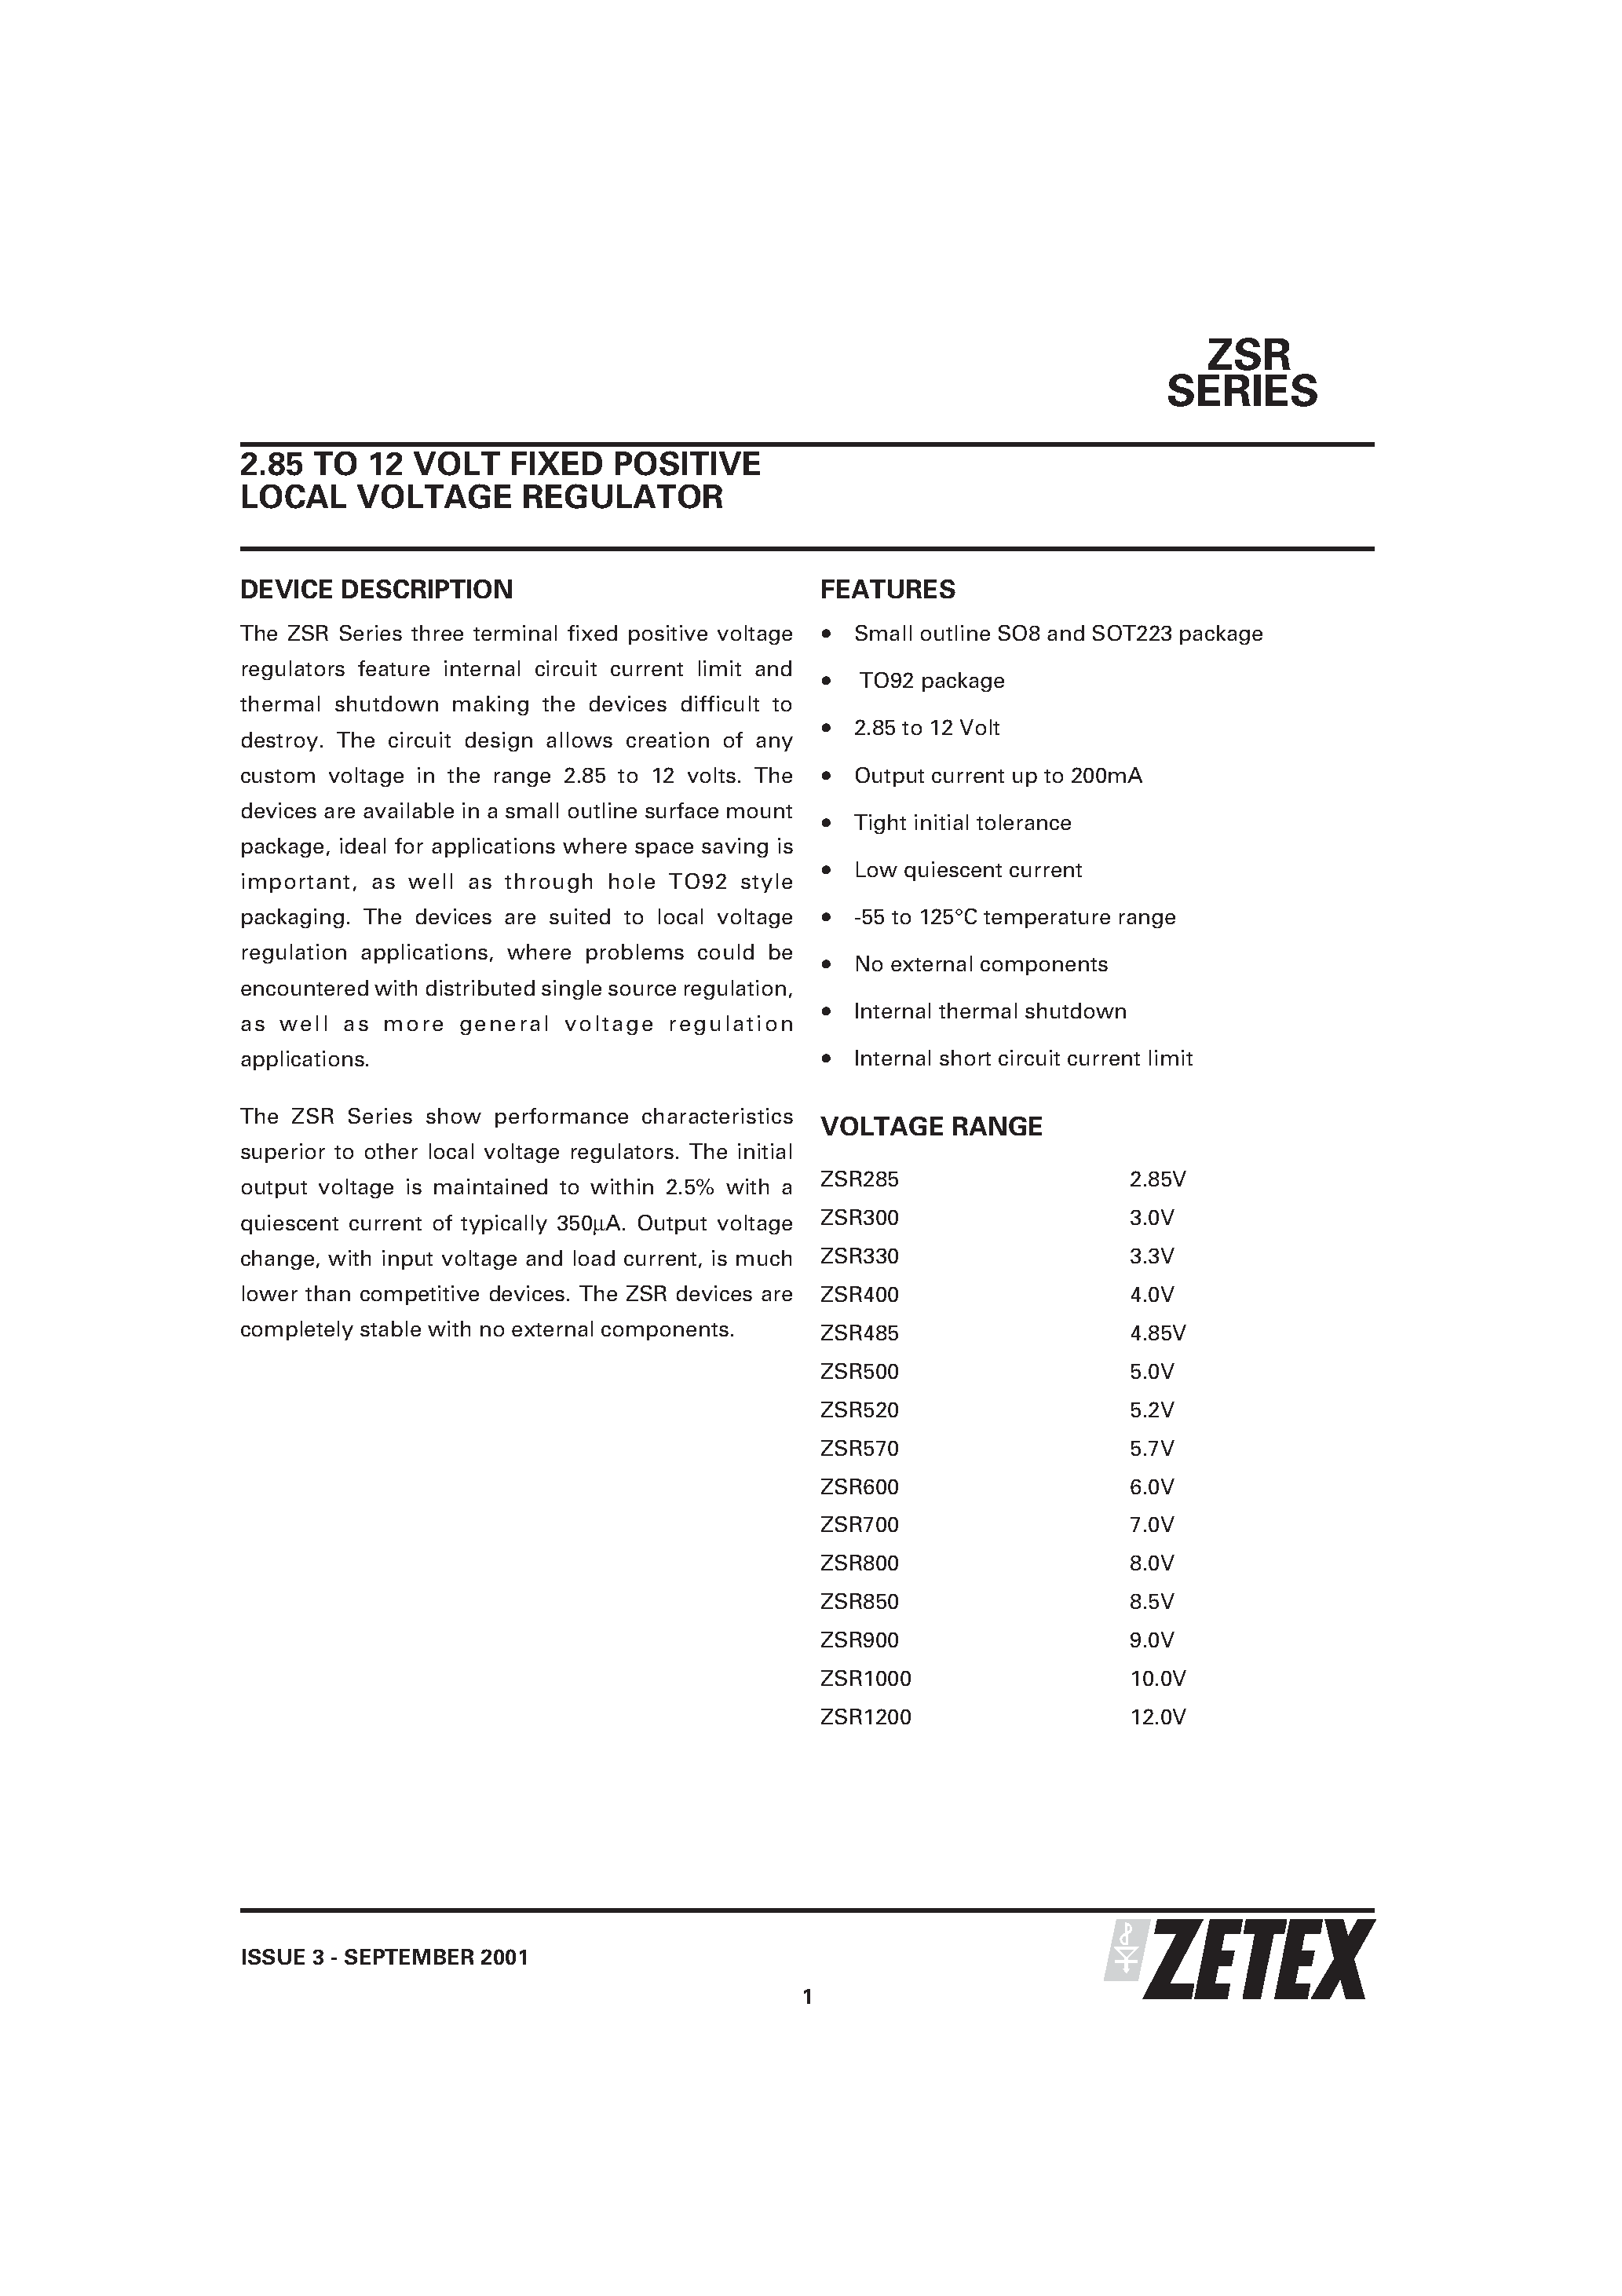 Datasheet ZSR285G - 2.85 TO 12 VOLT FIXED POSITIVE LOCAL VOLTAGE REGULATOR page 1